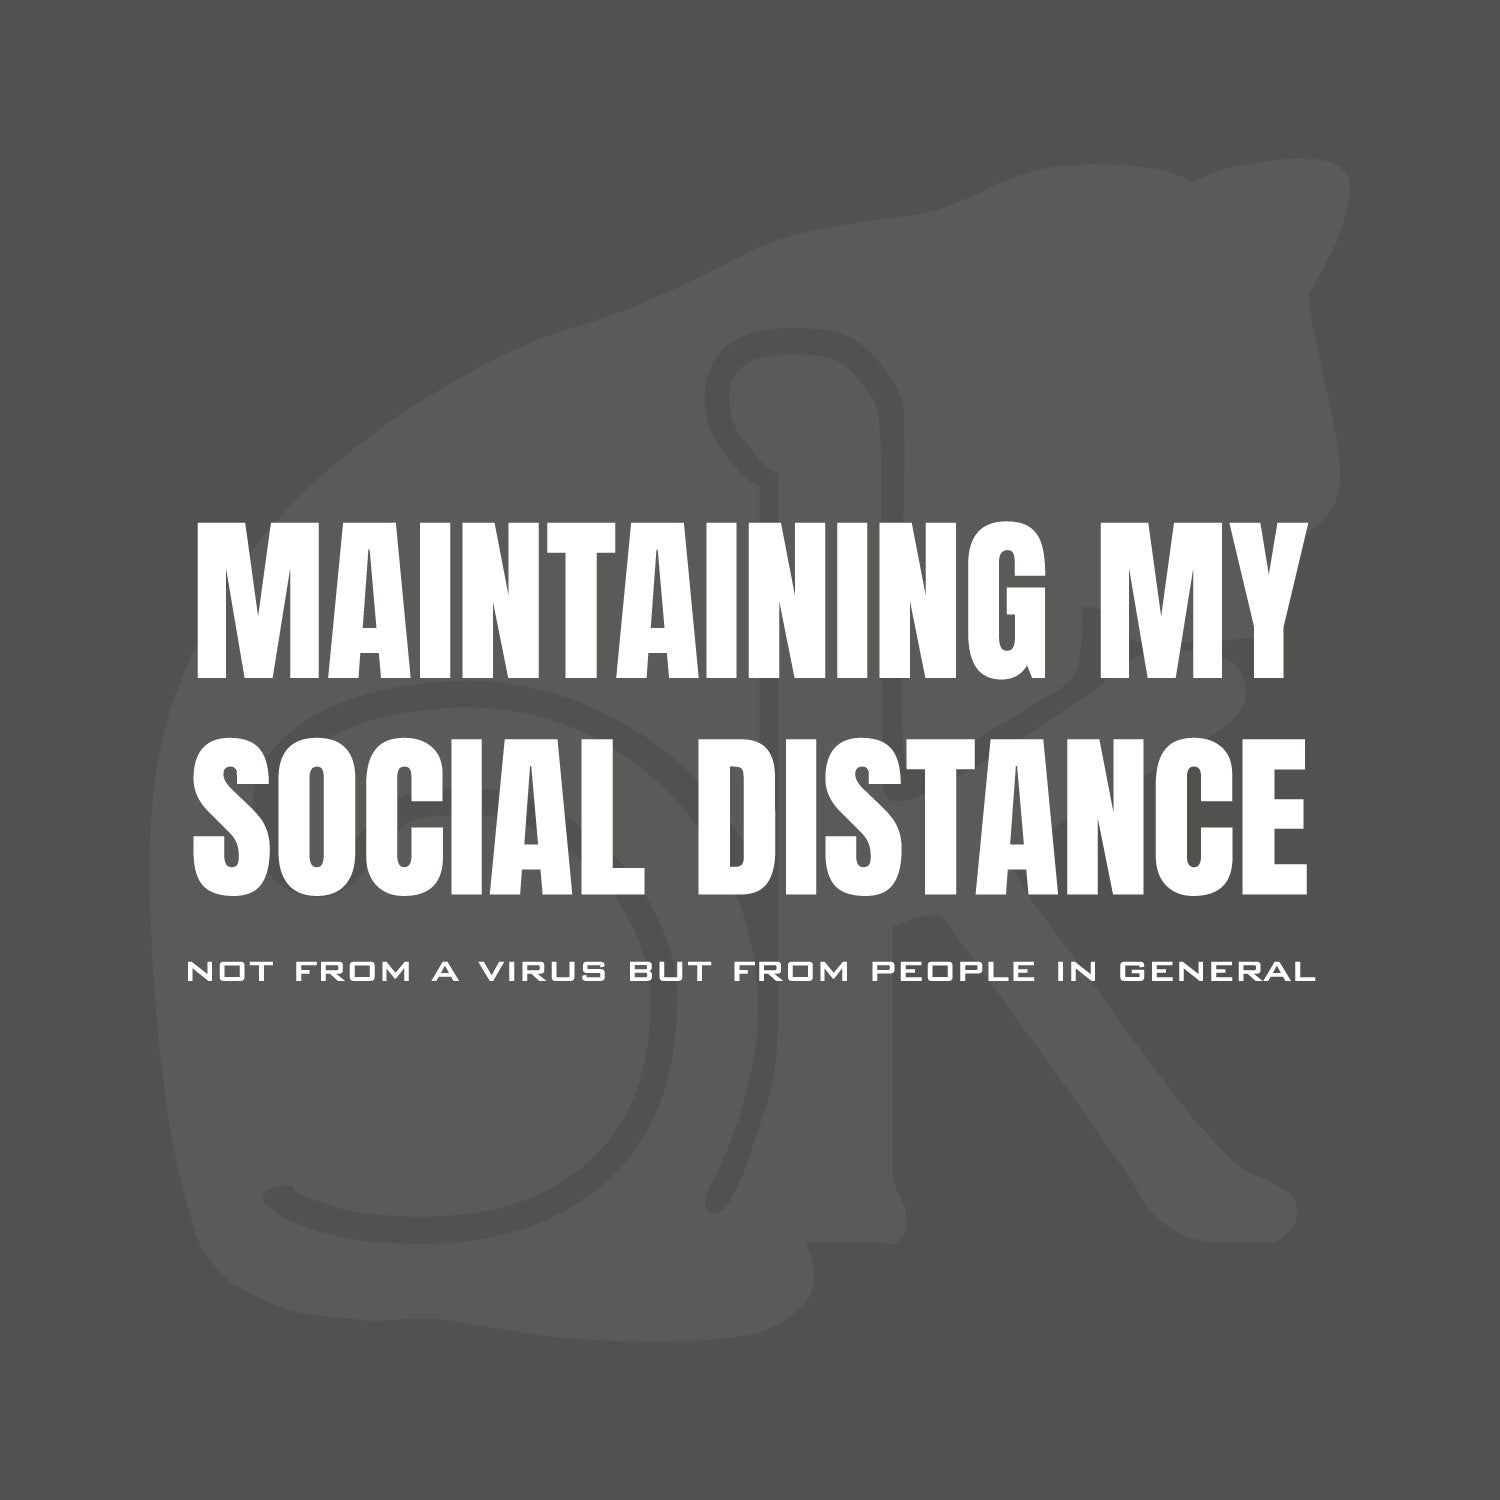 Standalone watermarked text graphic: "MAINTAINING MY SOCIAL DISTANCE not from a virus but from people in general"